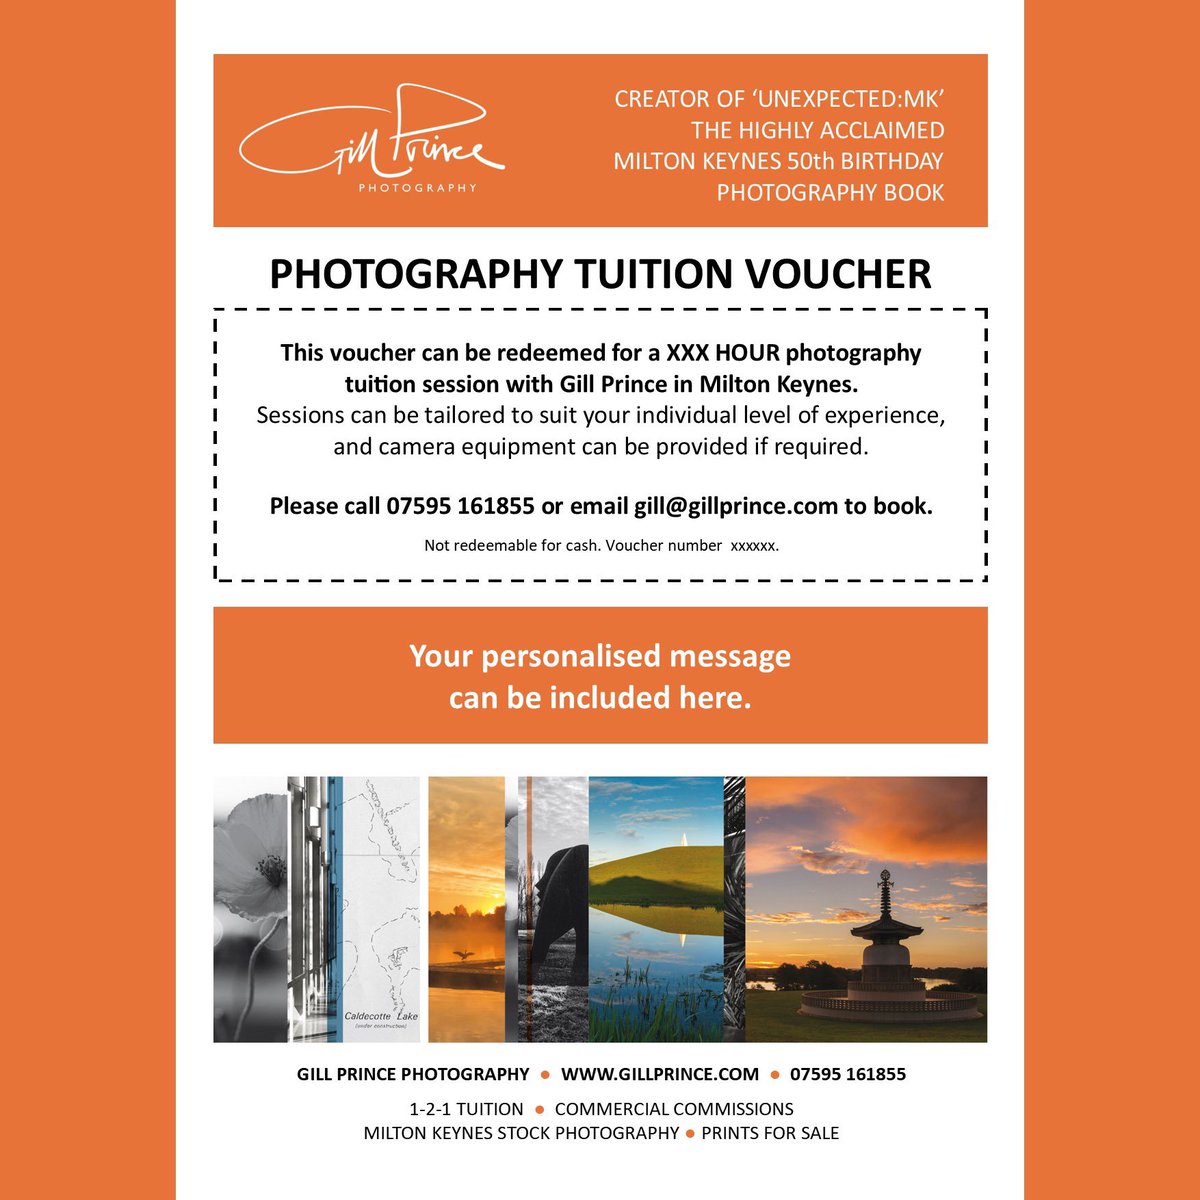 Apologies for the salesy post, but as we’re heading into Xmas shopping time of year, I just wanted to add a reminder about my tuition vouchers! Great to buy for someone else, or put on your own Xmas list 😊 More info here - gillprince.com/photography-tu…. Thank you!